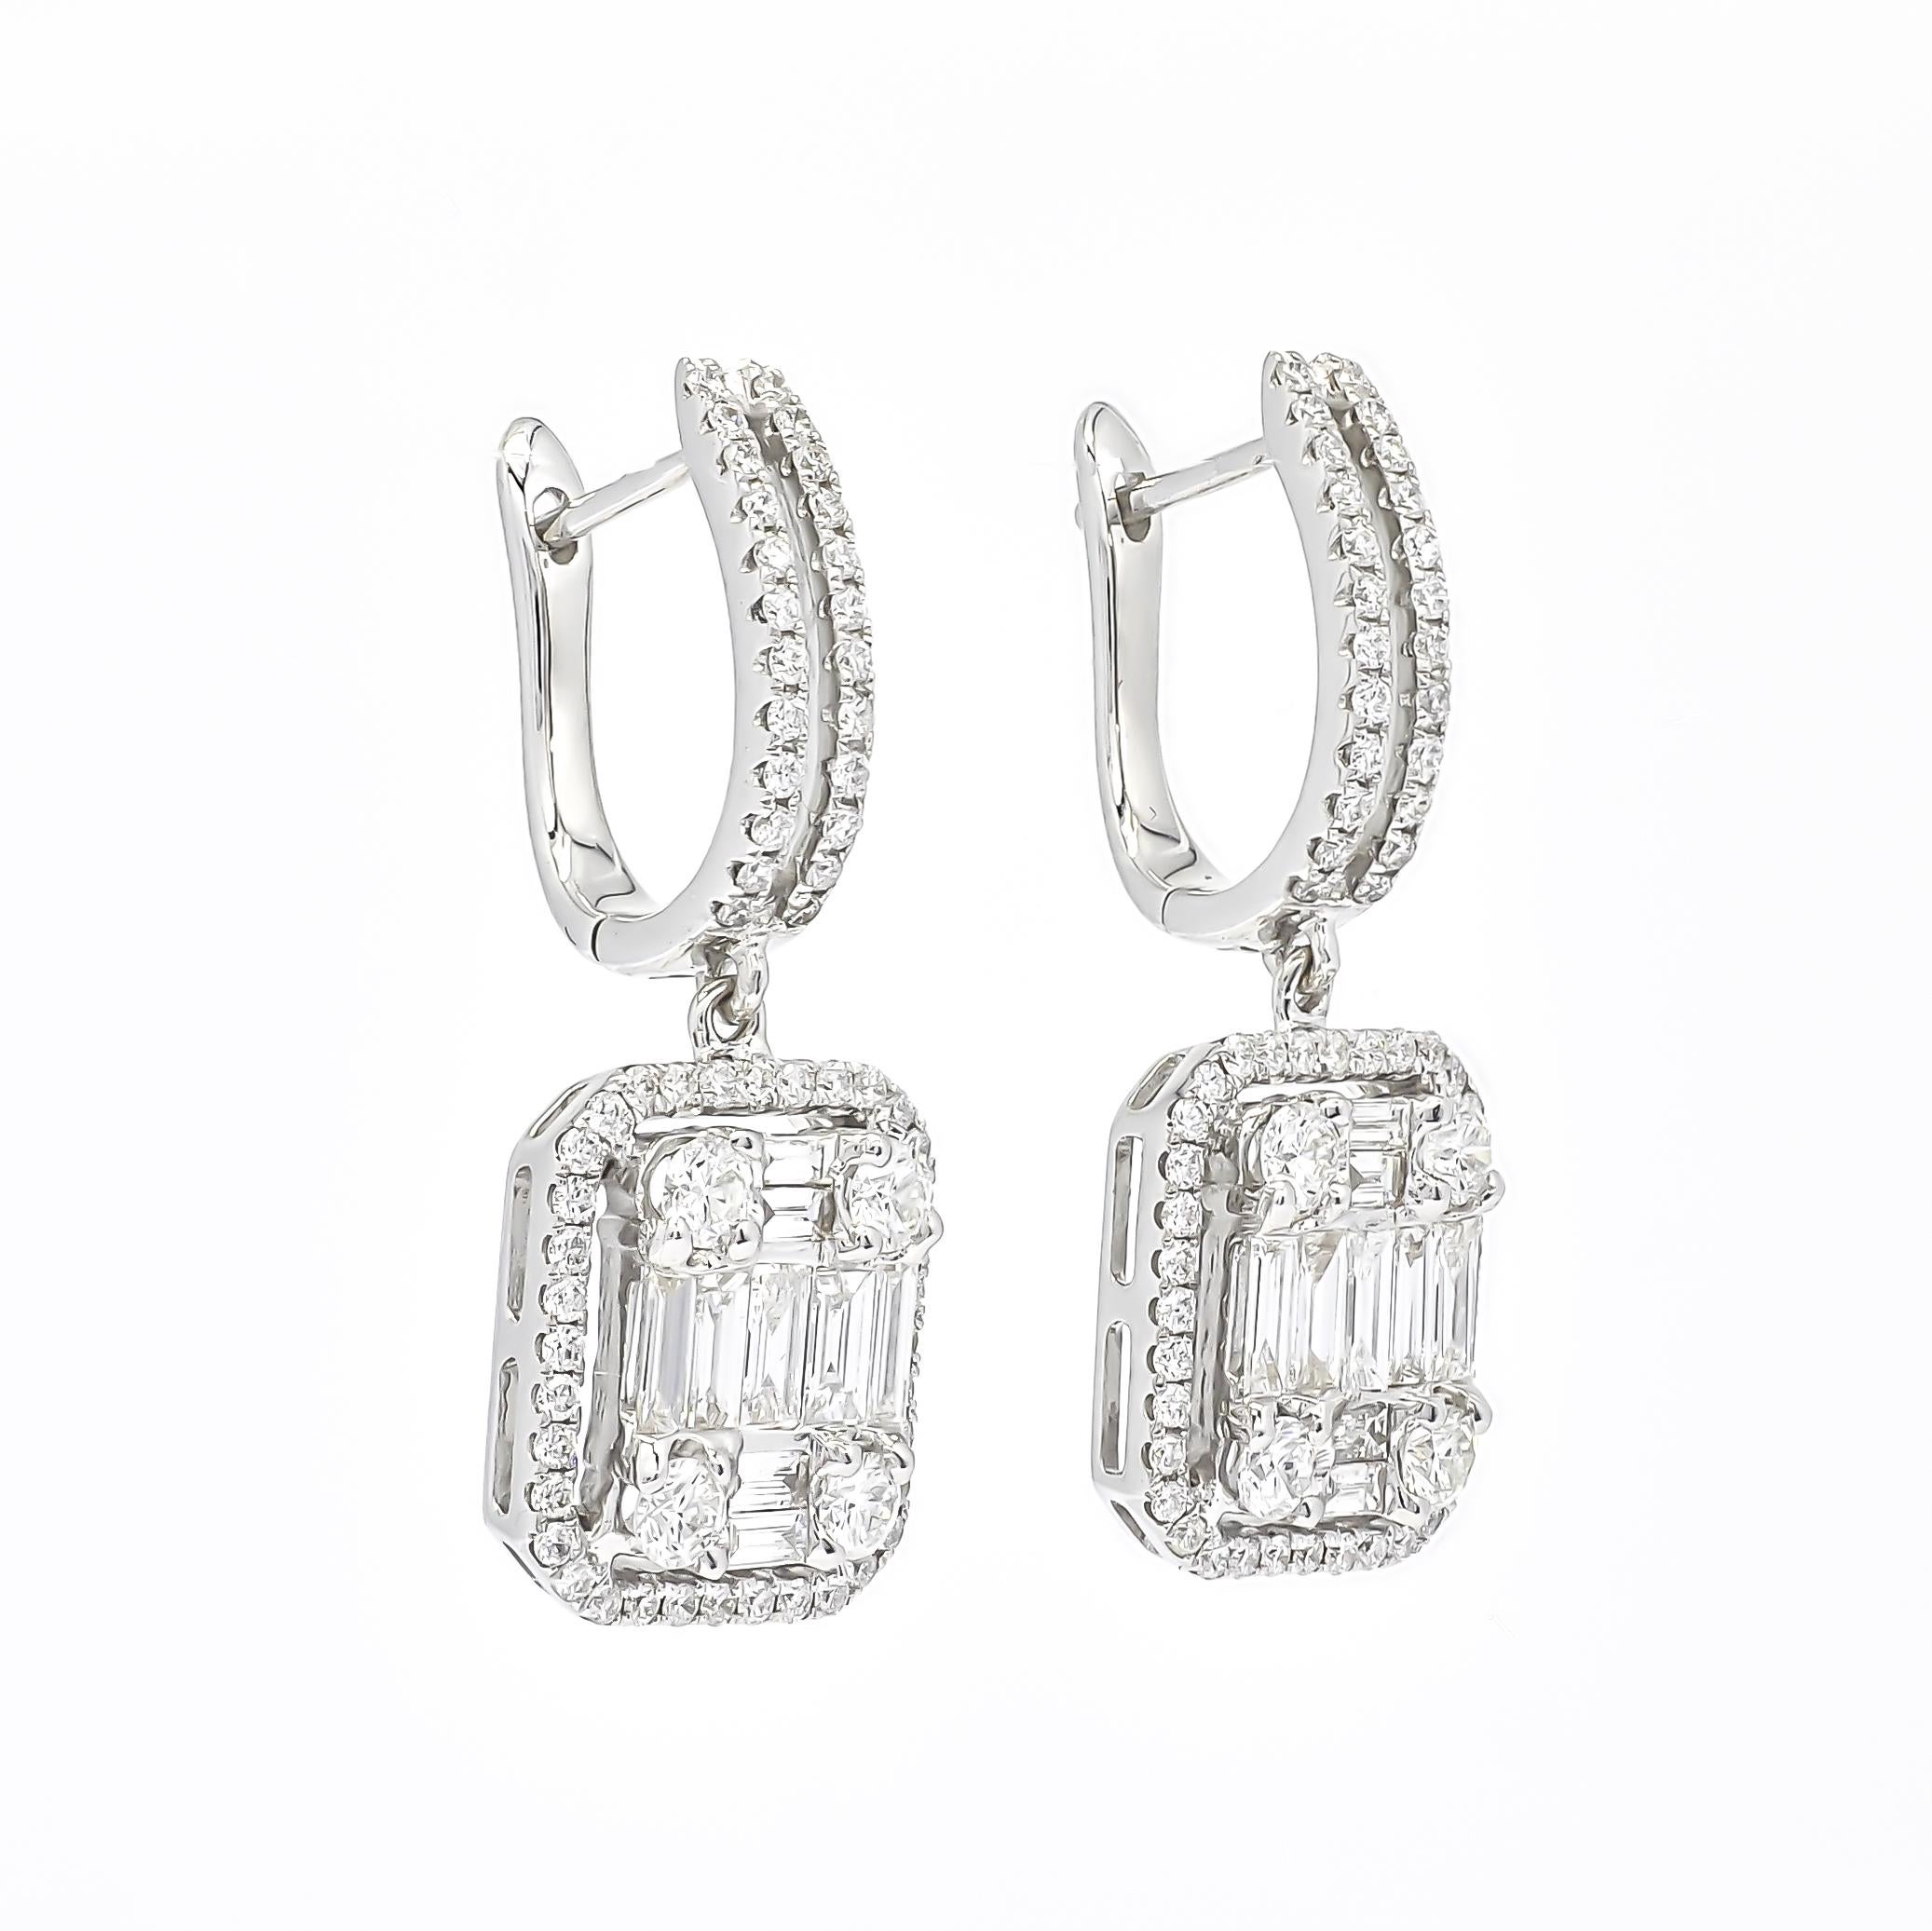 Artfully set in 18k white gold, this exquisite Earring features the soft shimmer of diamond baguette cluster setting with a halo gorgeously enhanced by hanging from Two Row Diamond Huggie. 

Elegance takes a bold turn with these extraordinary